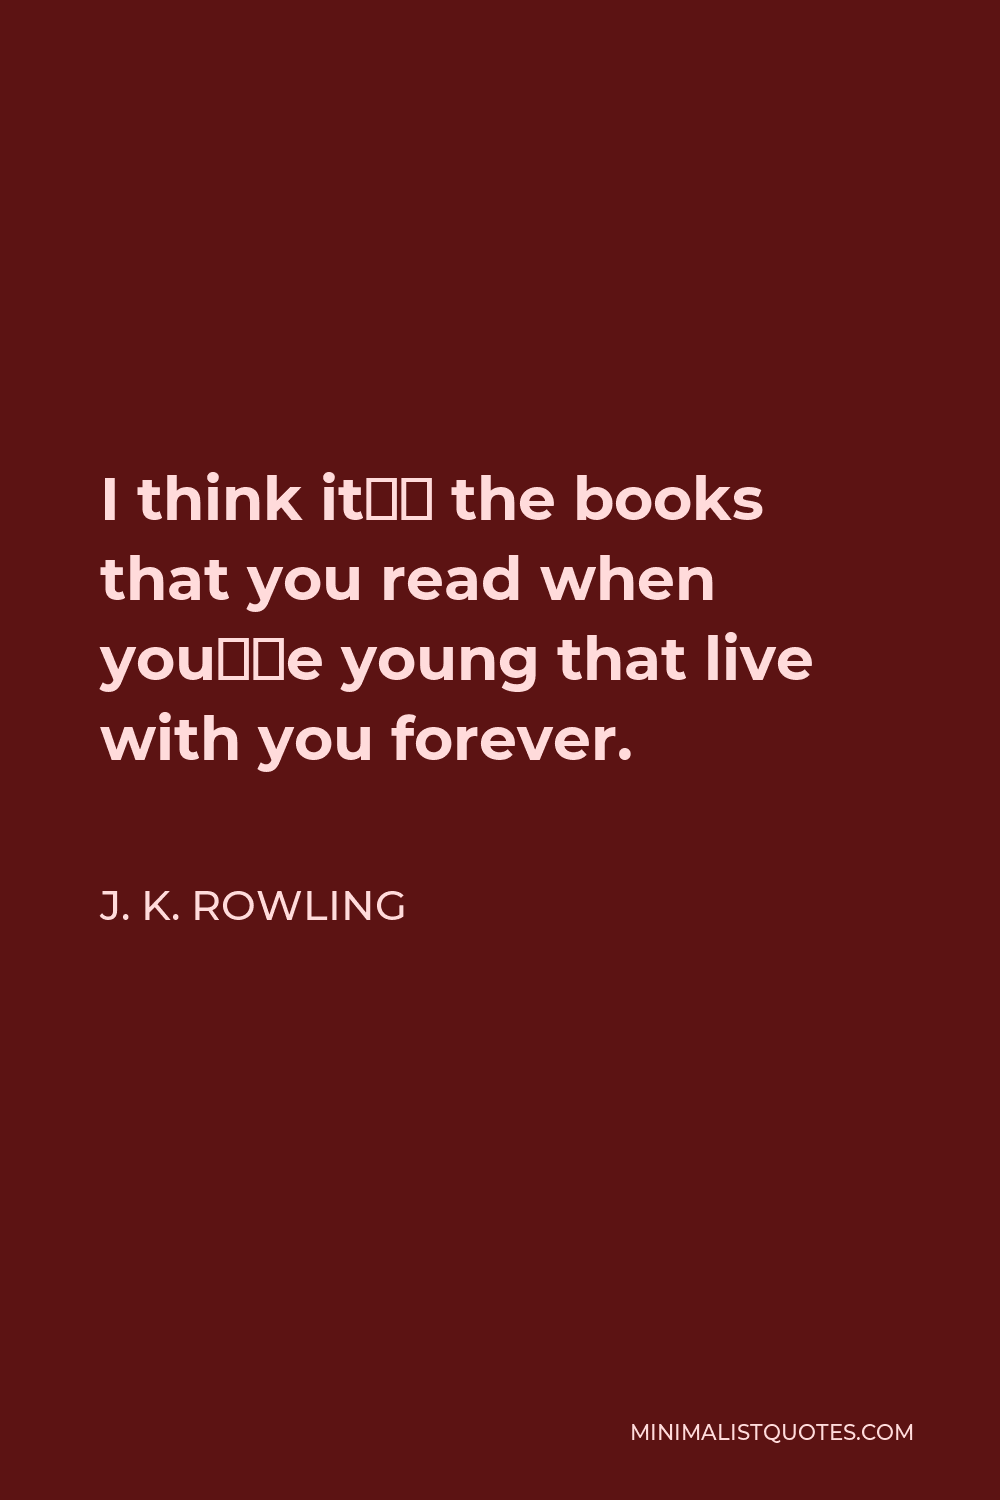 J. K. Rowling Quote - I think it’s the books that you read when you’re young that live with you forever.